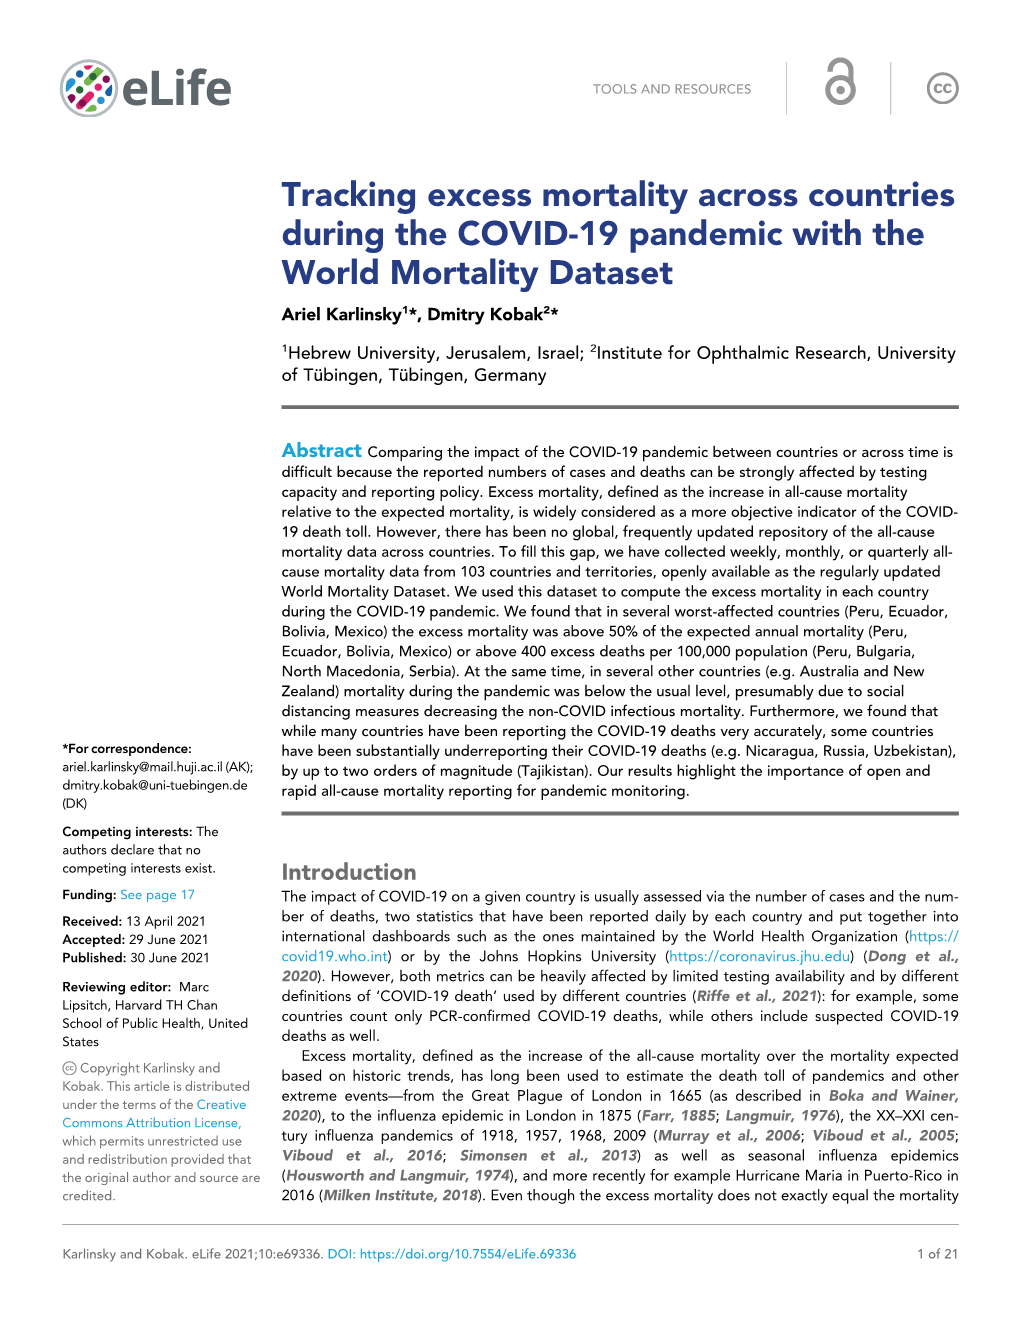 Tracking Excess Mortality Across Countries During the COVID-19 Pandemic with the World Mortality Dataset Ariel Karlinsky1*, Dmitry Kobak2*